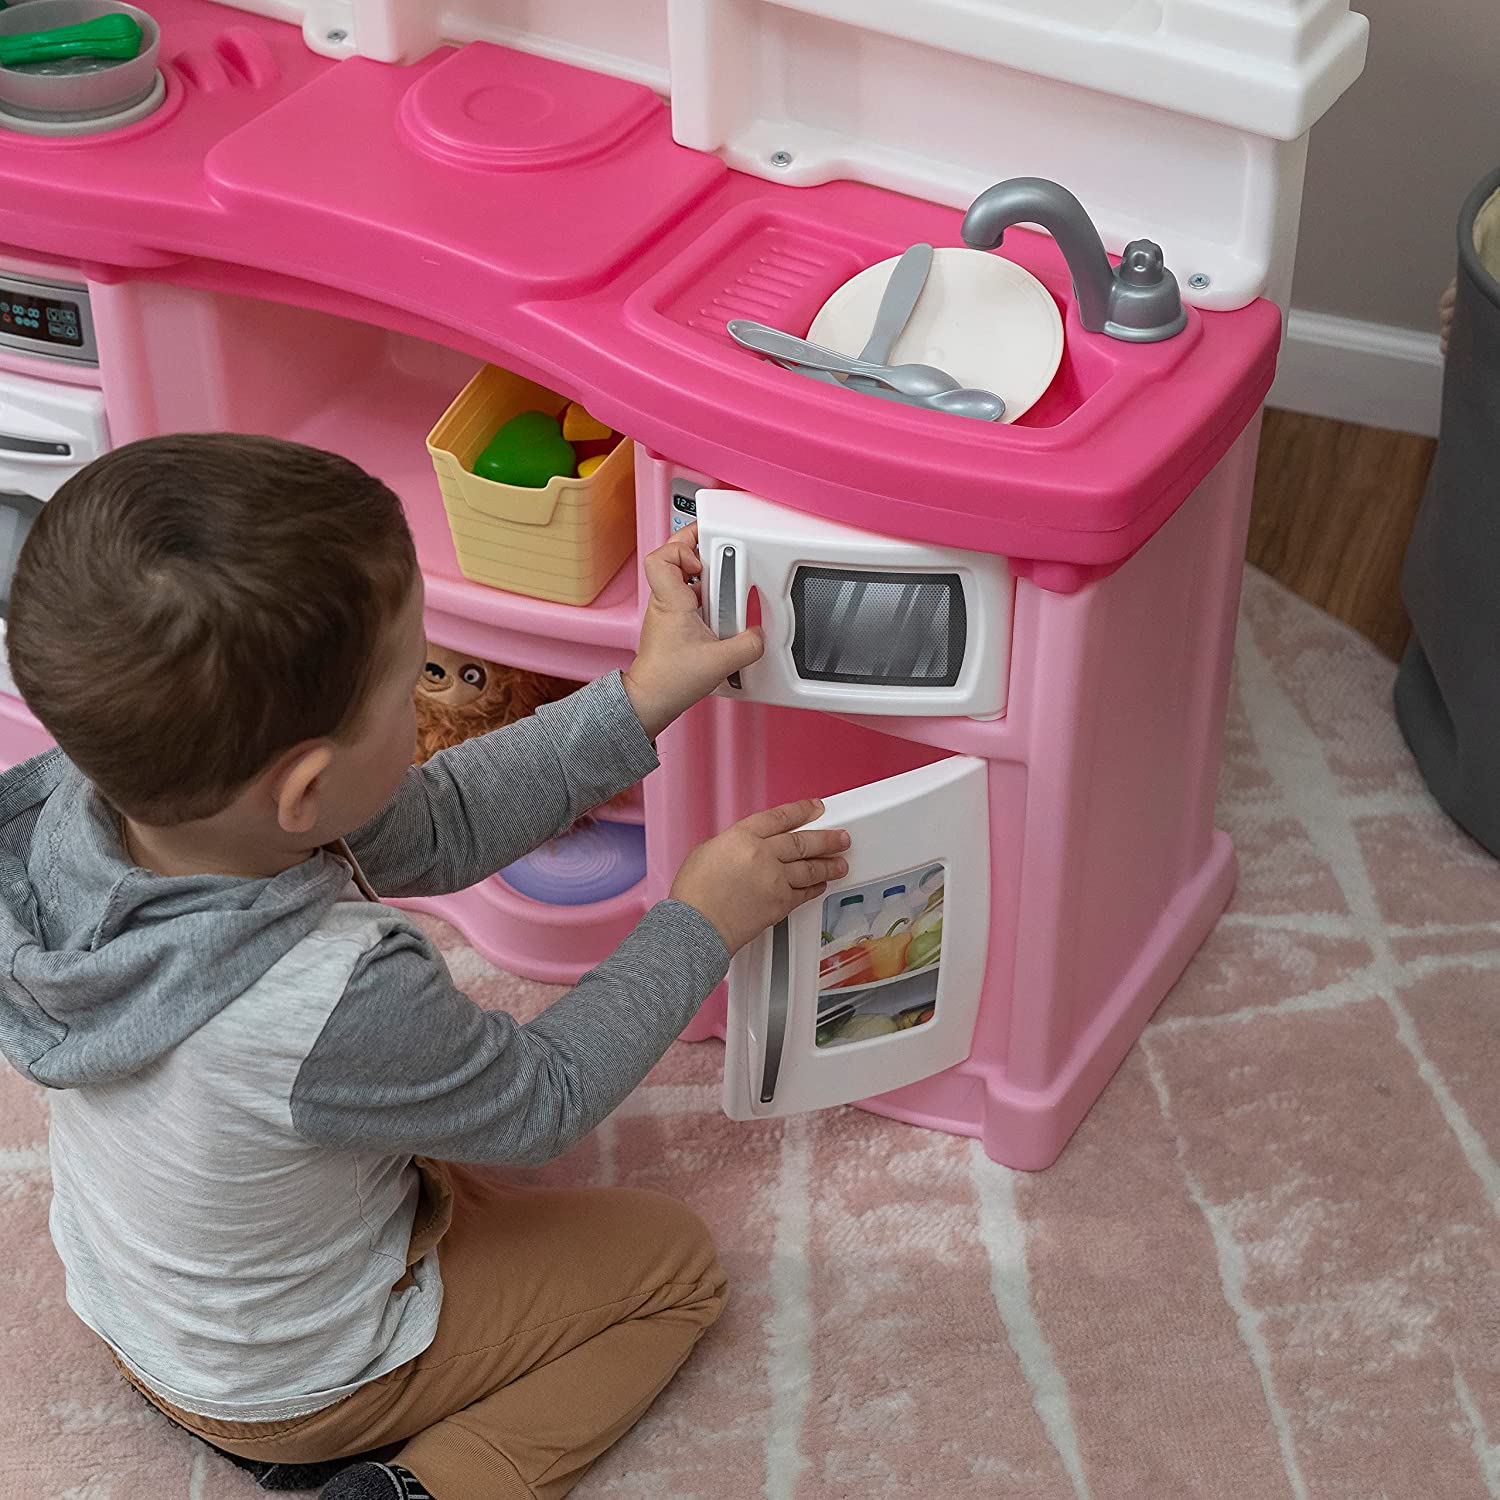 https://bigbigmart.com/wp-content/uploads/2023/05/Step2-Fun-with-Friends-Kitchen-Set-for-Kids-%E2%80%93-Pink-%E2%80%93-Includes-Toy-Kitchen-Accessories-Interactive-Features-for-Pretend-Play-%E2%80%93-Indoor-Outdoor-Toddler-Playset4.jpg